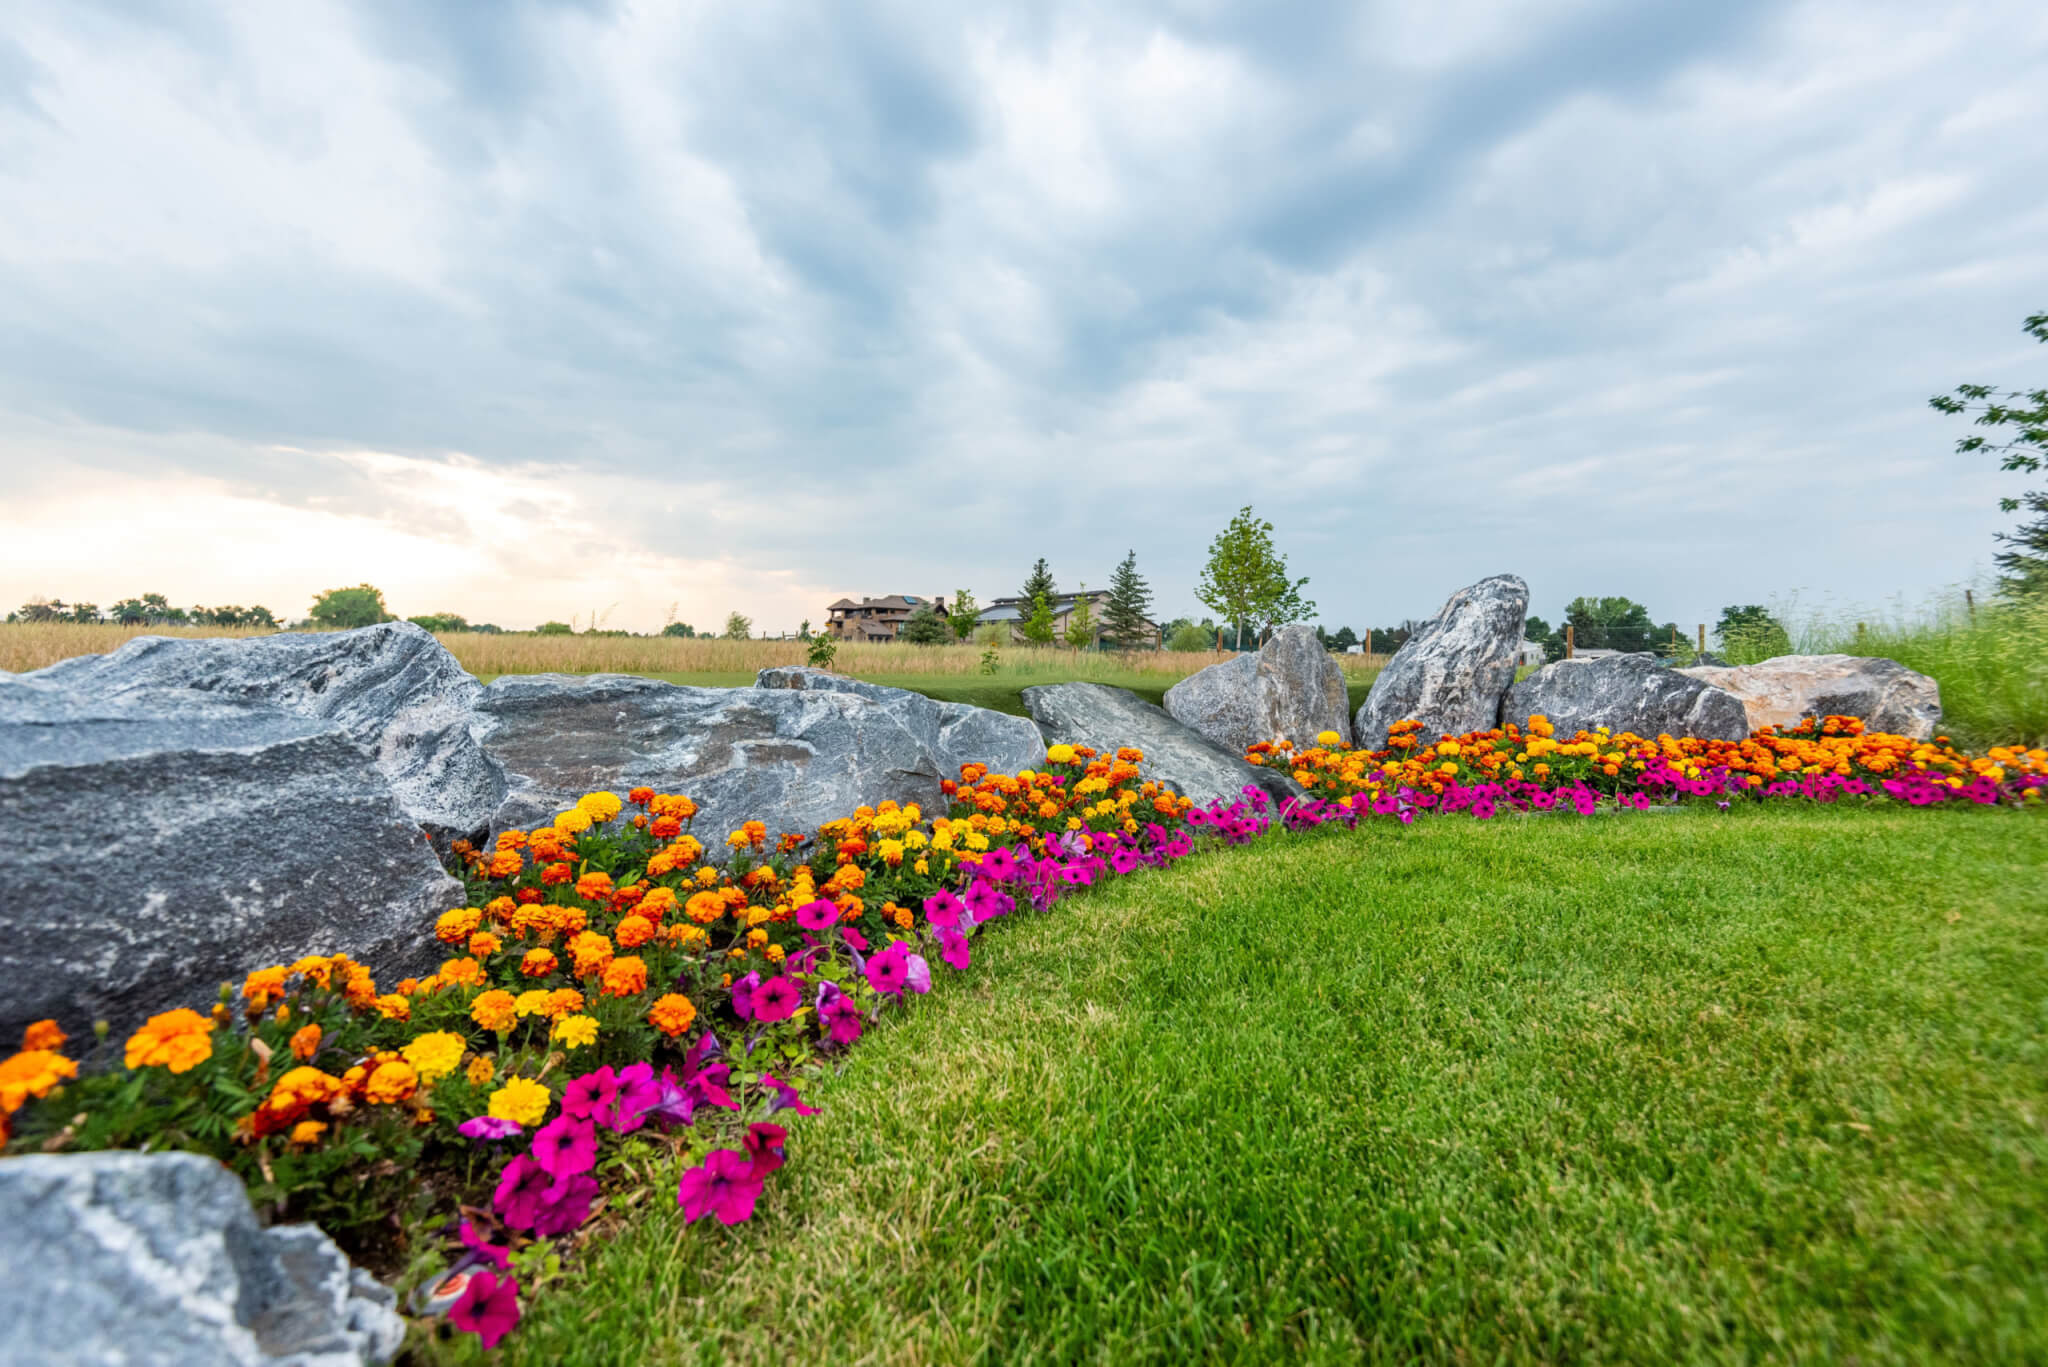 grass field landscape with some rocks, colourful flower plants and trees